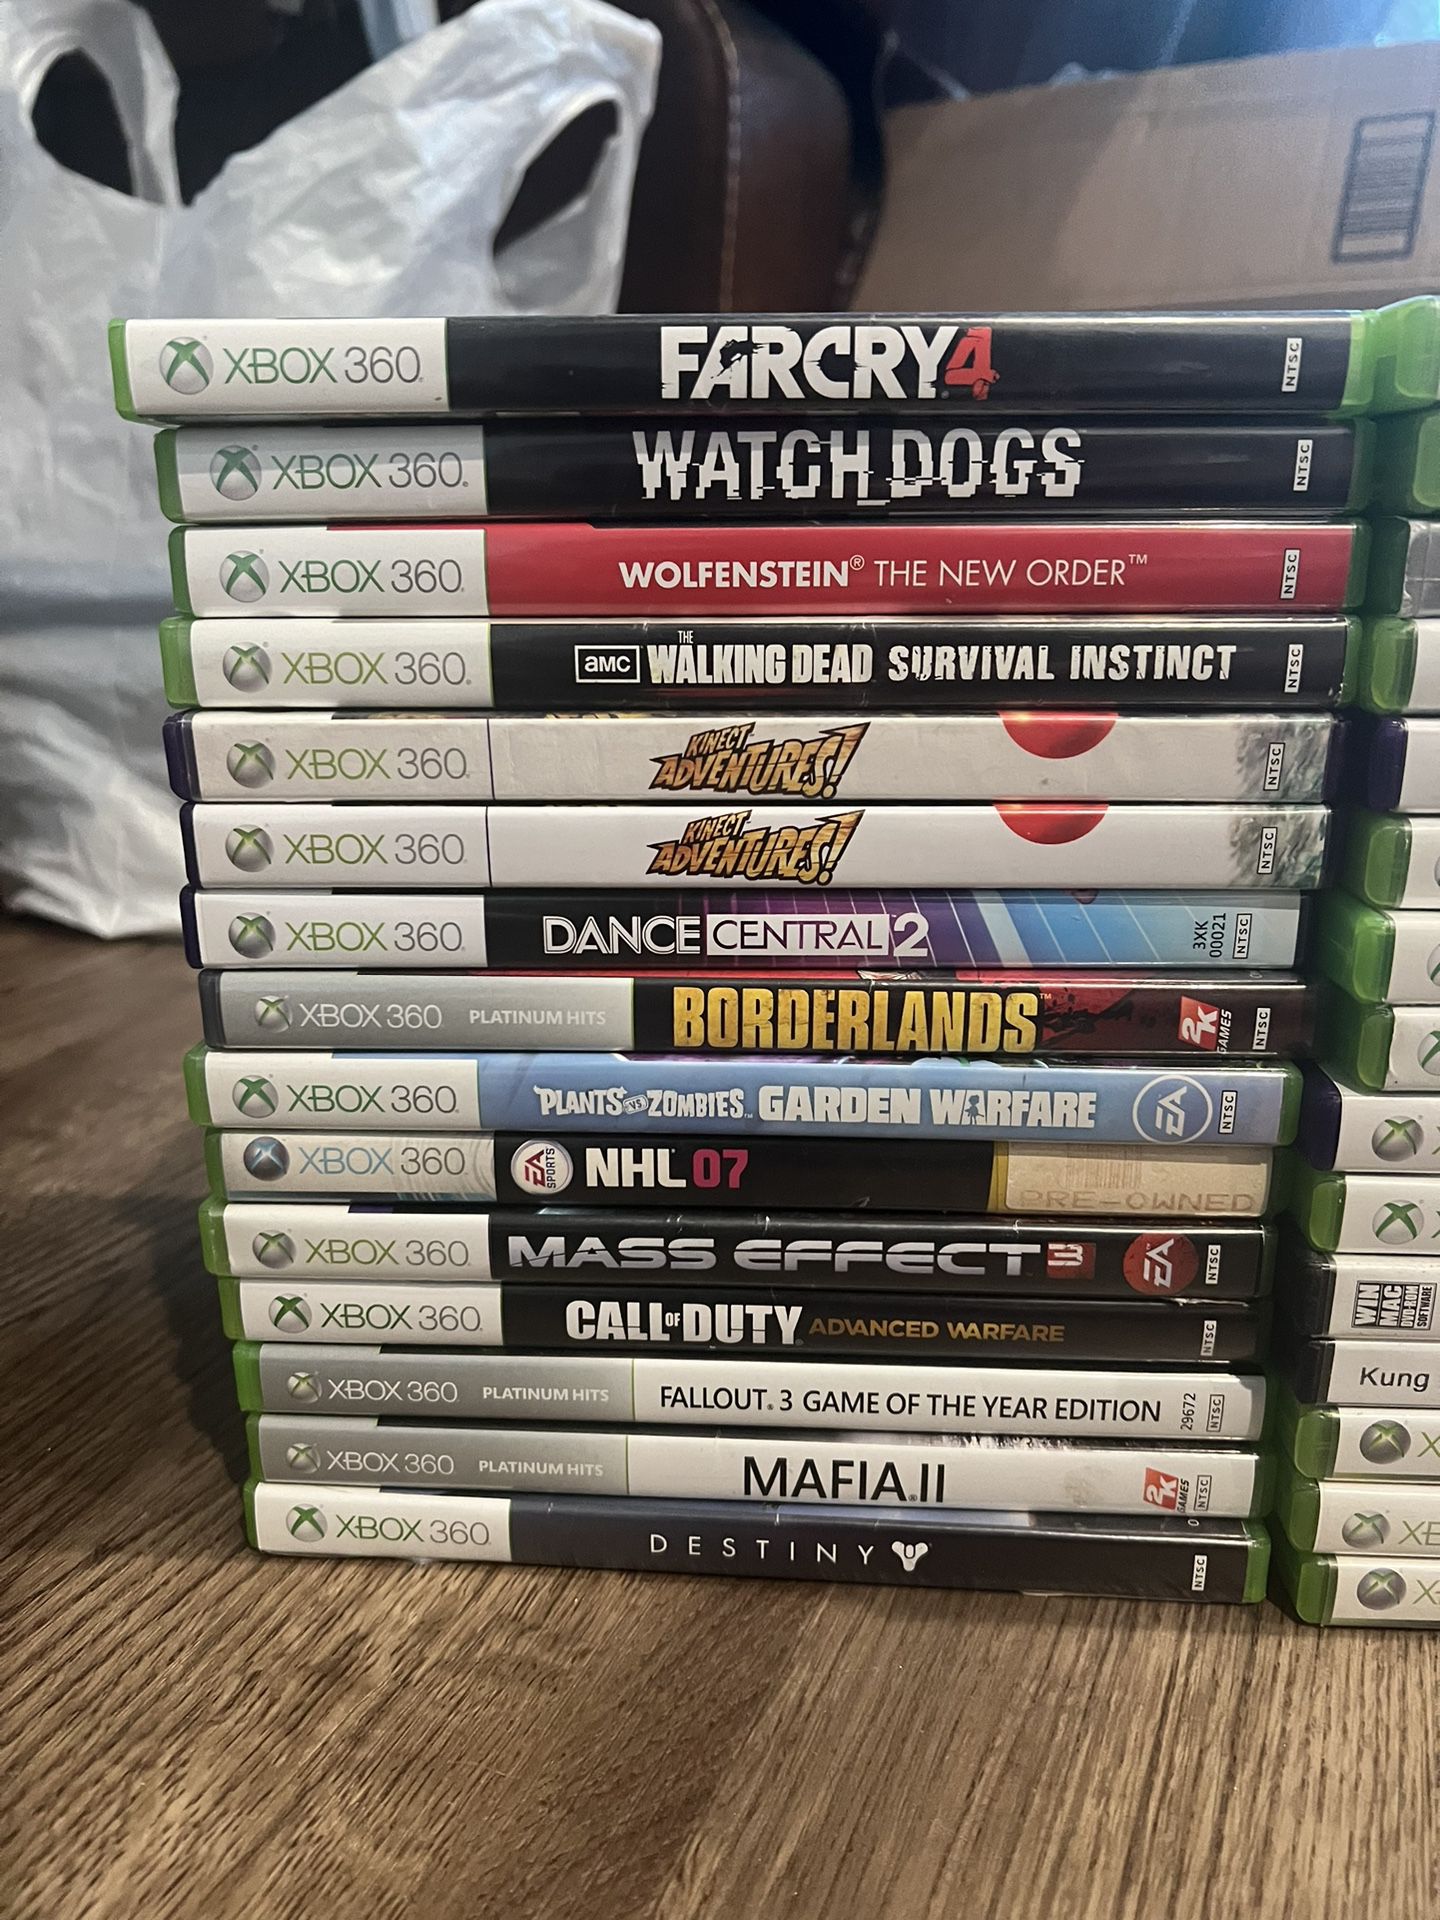  Xbox One, Xbox 360, and Xbox Games